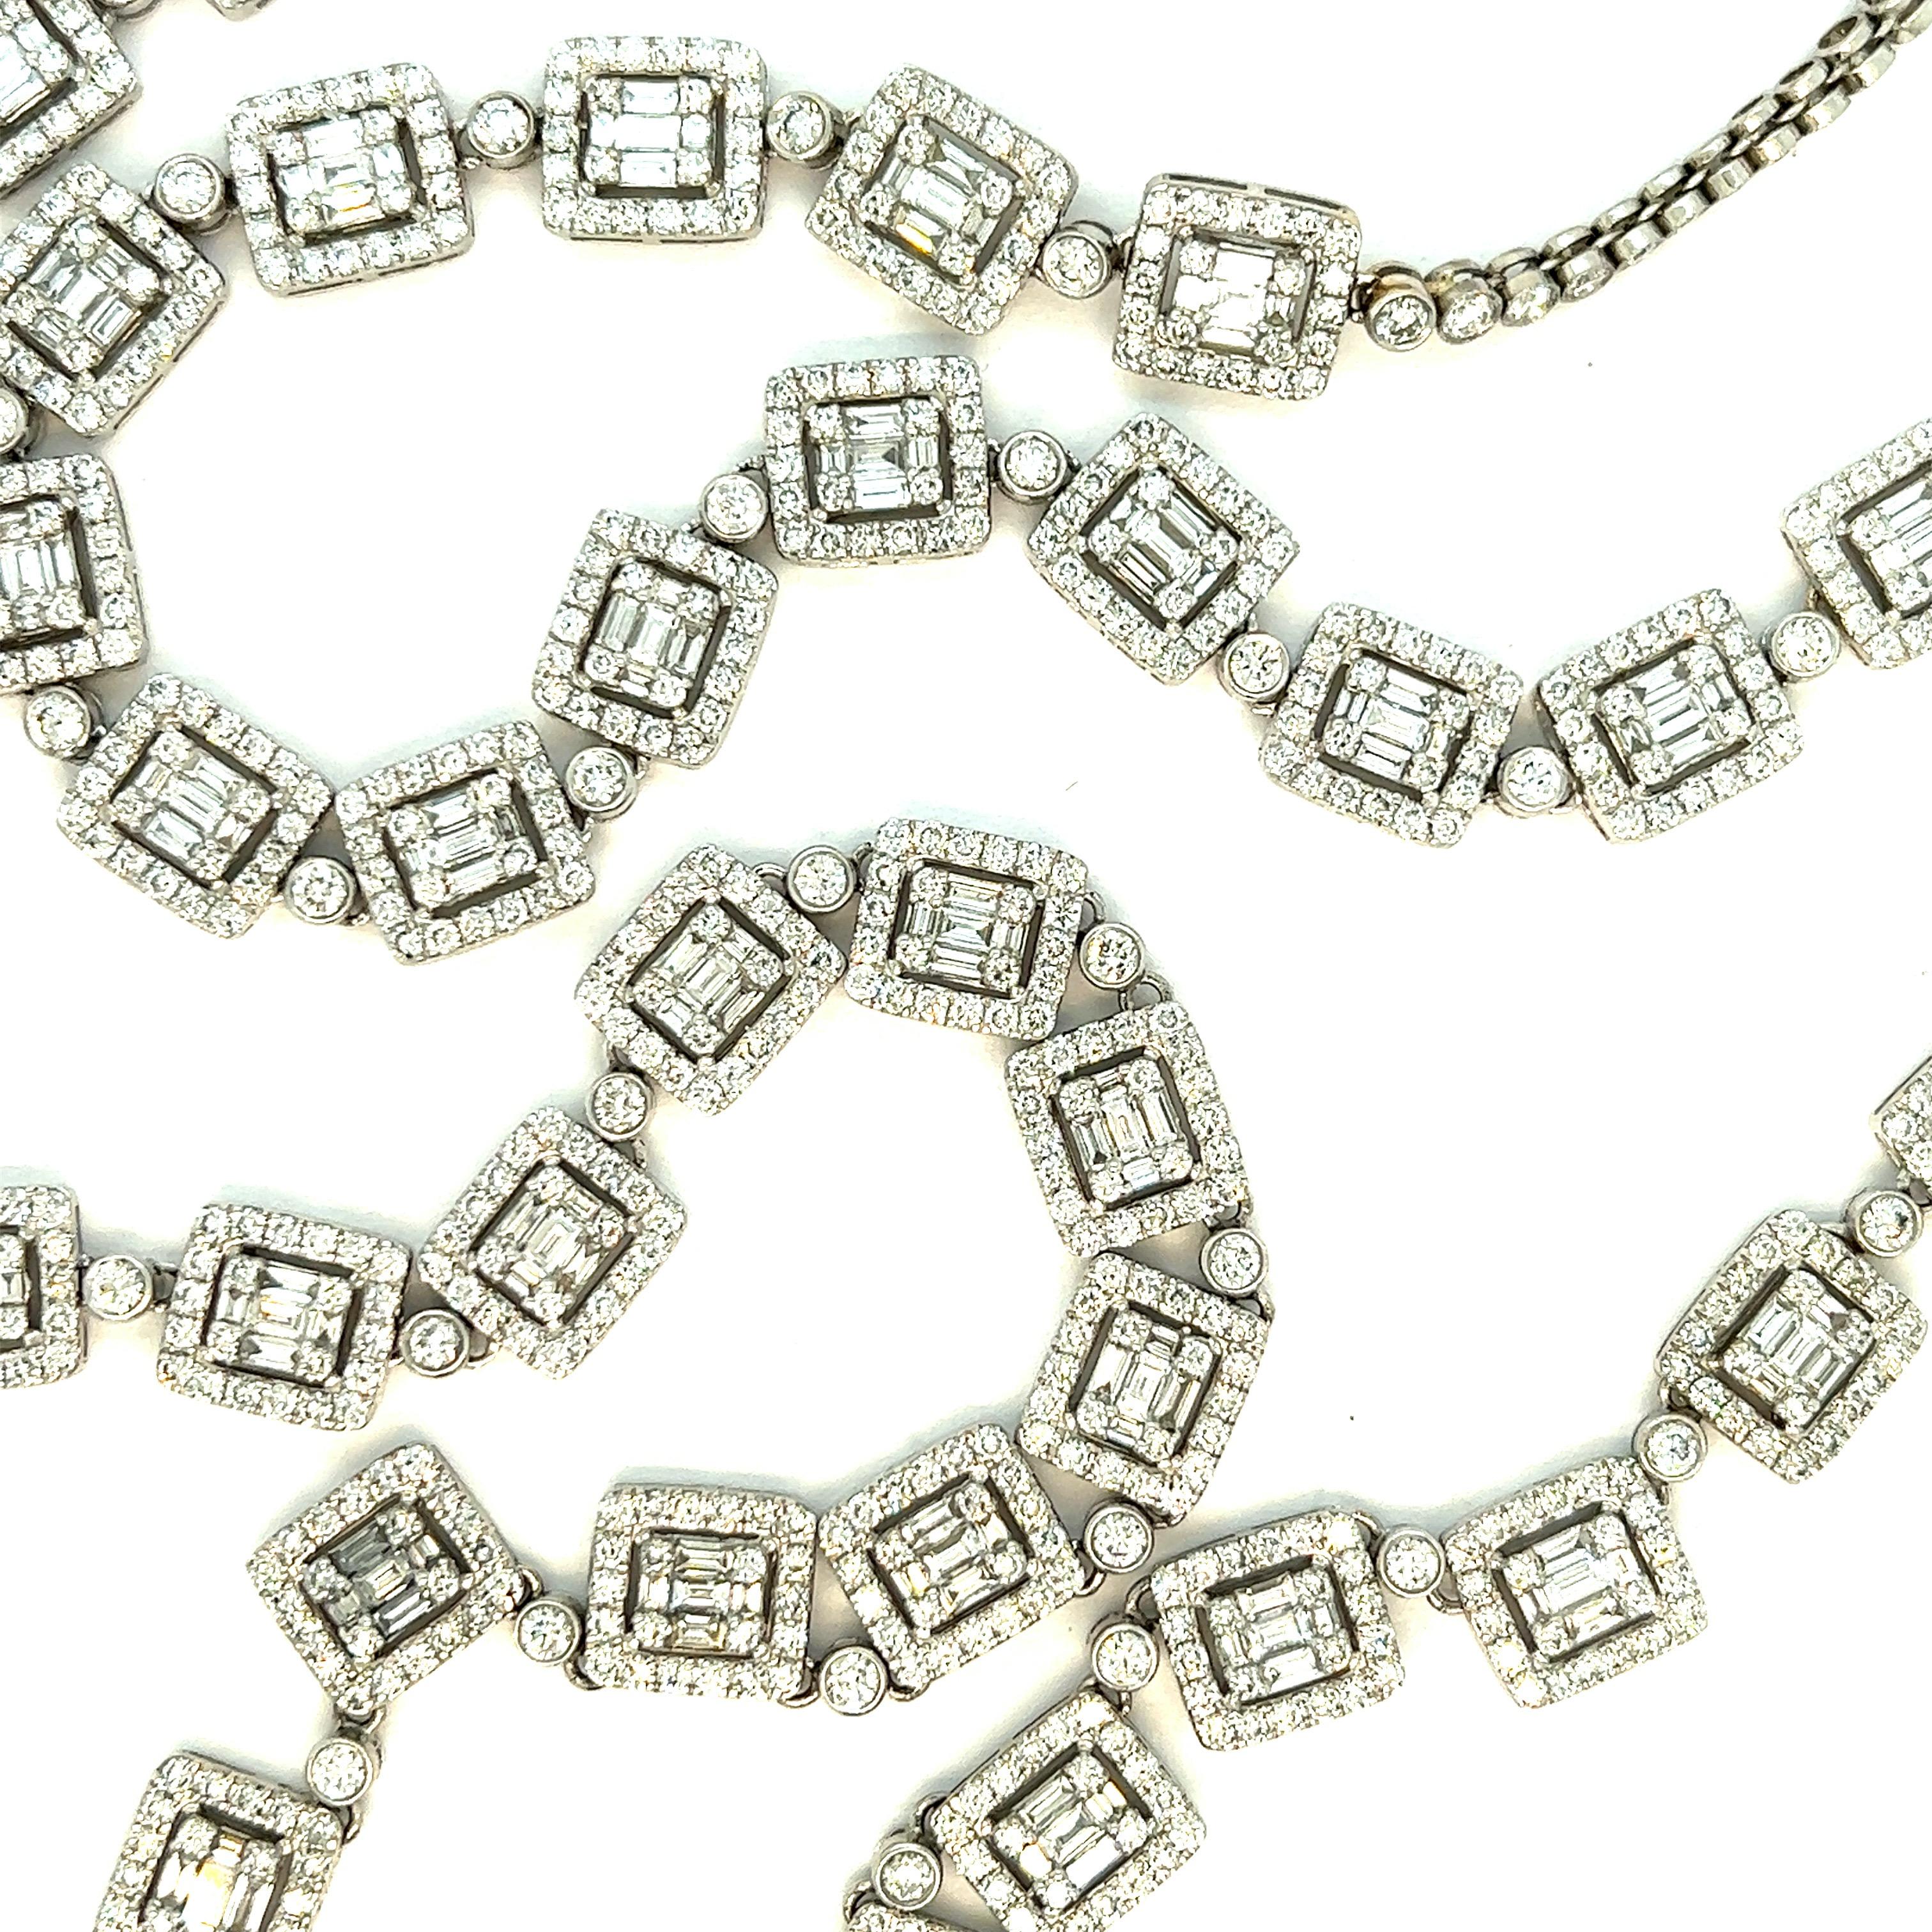 Diamond white gold long necklace

Round- and baguette-cut diamonds of approximately 32 carats, 18 karat white gold; chain marked 18K

Size: width 0.31 inch, length 31 inches
Total weight: 69.3 grams